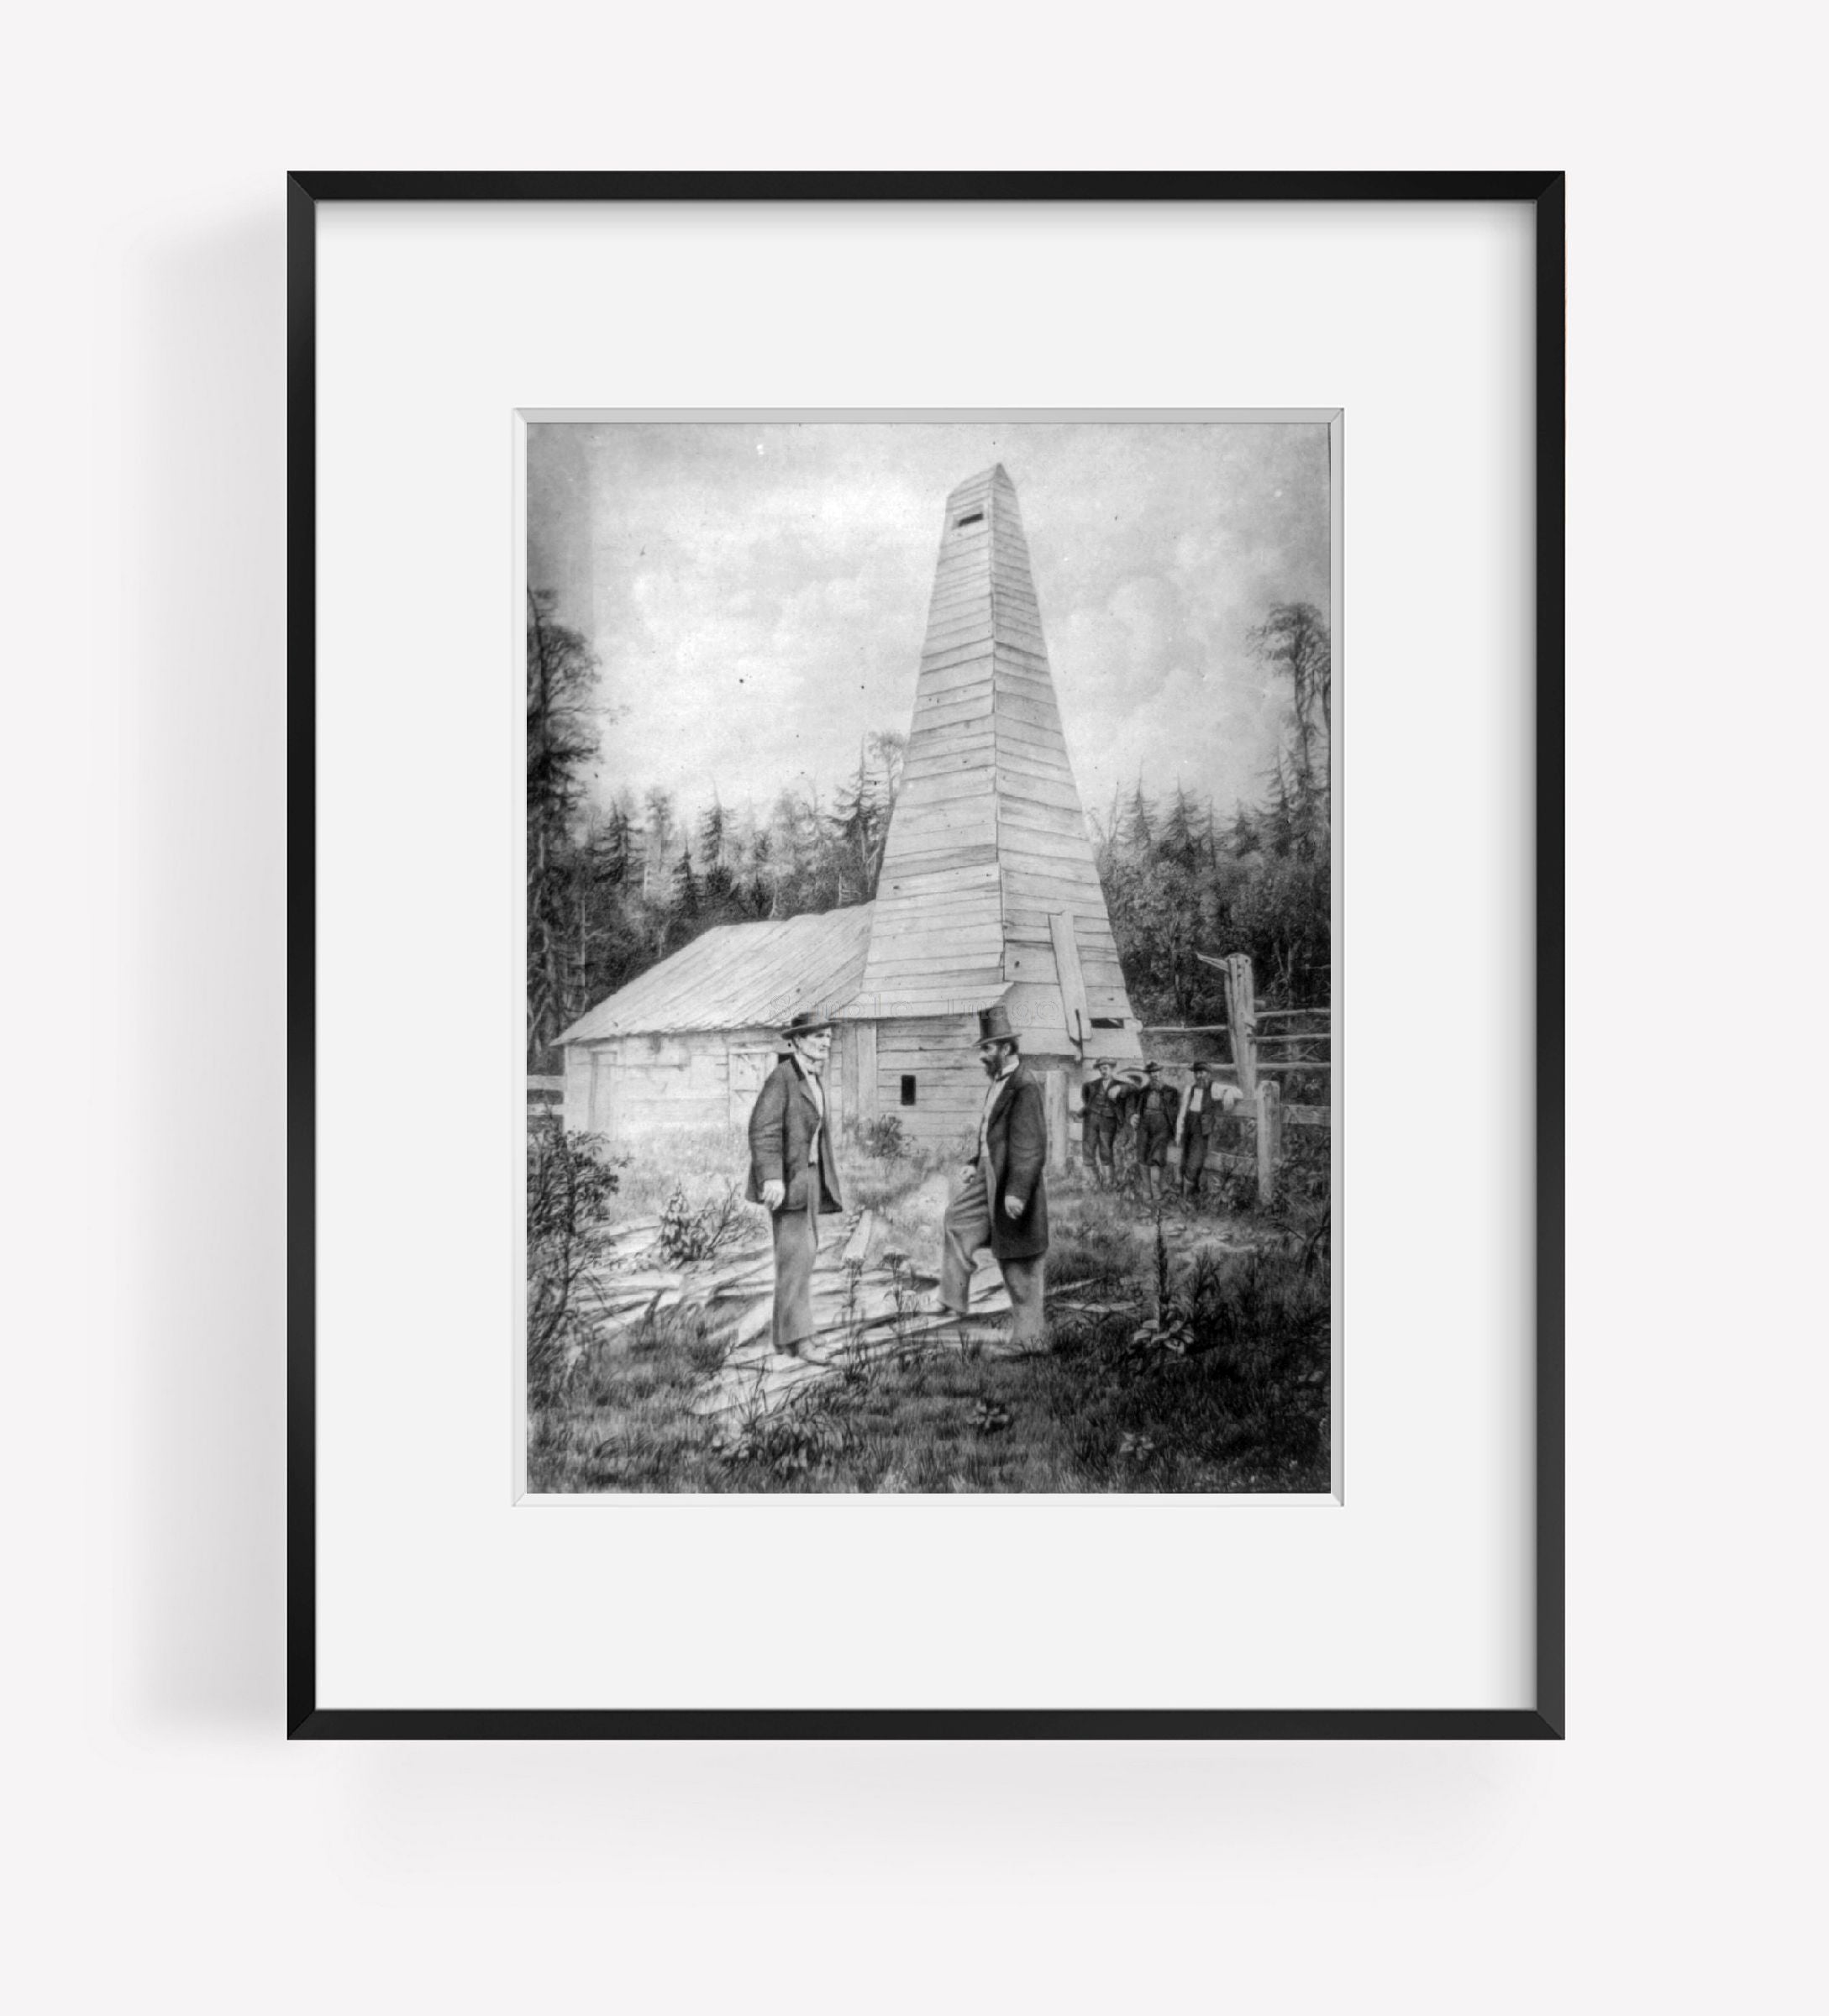 Photo: First oil well, Edwin L, Drake Well, commercial, drill, Titusville, Pennsylvani